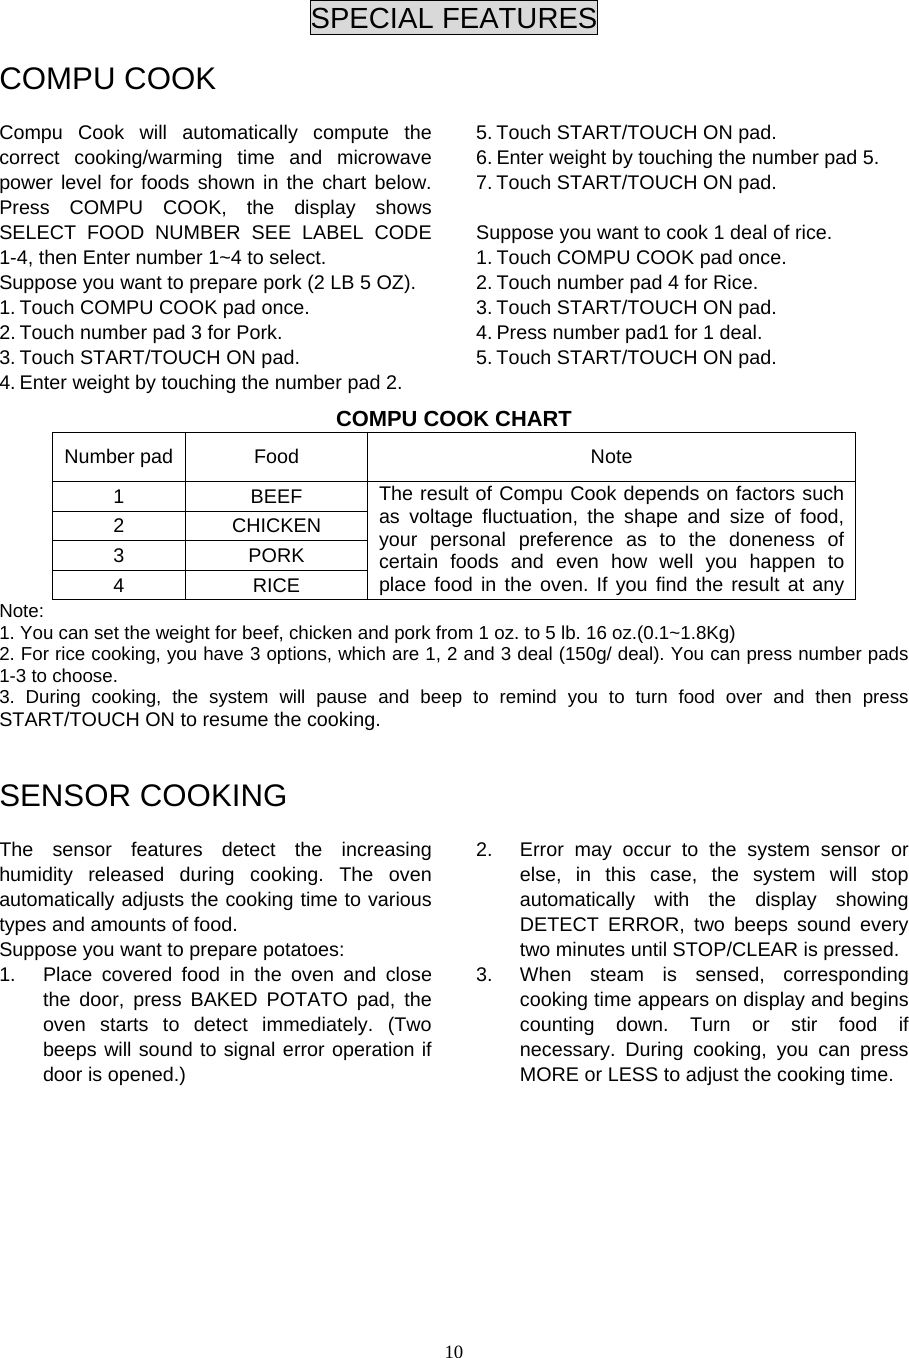  10 SPECIAL FEATURES  COMPU COOK  Compu Cook will automatically compute the correct cooking/warming time and microwave power level for foods shown in the chart below. Press COMPU COOK, the display shows SELECT FOOD NUMBER SEE LABEL CODE 1-4, then Enter number 1~4 to select. Suppose you want to prepare pork (2 LB 5 OZ). 1. Touch COMPU COOK pad once. 2. Touch number pad 3 for Pork. 3. Touch START/TOUCH ON pad. 4. Enter weight by touching the number pad 2.   5. Touch START/TOUCH ON pad. 6. Enter weight by touching the number pad 5. 7. Touch START/TOUCH ON pad.  Suppose you want to cook 1 deal of rice. 1. Touch COMPU COOK pad once. 2. Touch number pad 4 for Rice. 3. Touch START/TOUCH ON pad. 4. Press number pad1 for 1 deal. 5. Touch START/TOUCH ON pad. COMPU COOK CHART Number pad  Food Note 1 BEEF 2 CHICKEN 3 PORK 4 RICE The result of Compu Cook depends on factors such as voltage fluctuation, the shape and size of food, your personal preference as to the doneness of certain foods and even how well you happen to place food in the oven. If you find the result at any Note:  1. You can set the weight for beef, chicken and pork from 1 oz. to 5 lb. 16 oz.(0.1~1.8Kg) 2. For rice cooking, you have 3 options, which are 1, 2 and 3 deal (150g/ deal). You can press number pads 1-3 to choose.   3. During cooking, the system will pause and beep to remind you to turn food over and then press START/TOUCH ON to resume the cooking.   SENSOR COOKING  The sensor features detect the increasing humidity released during cooking. The oven automatically adjusts the cooking time to various types and amounts of food. Suppose you want to prepare potatoes:   1.  Place covered food in the oven and close the door, press BAKED POTATO pad, the oven starts to detect immediately. (Two beeps will sound to signal error operation if door is opened.)   2.  Error may occur to the system sensor or else, in this case, the system will stop automatically with the display showing DETECT ERROR, two beeps sound every two minutes until STOP/CLEAR is pressed.   3.  When steam is sensed, corresponding cooking time appears on display and begins counting down. Turn or stir food if necessary. During cooking, you can press MORE or LESS to adjust the cooking time.           